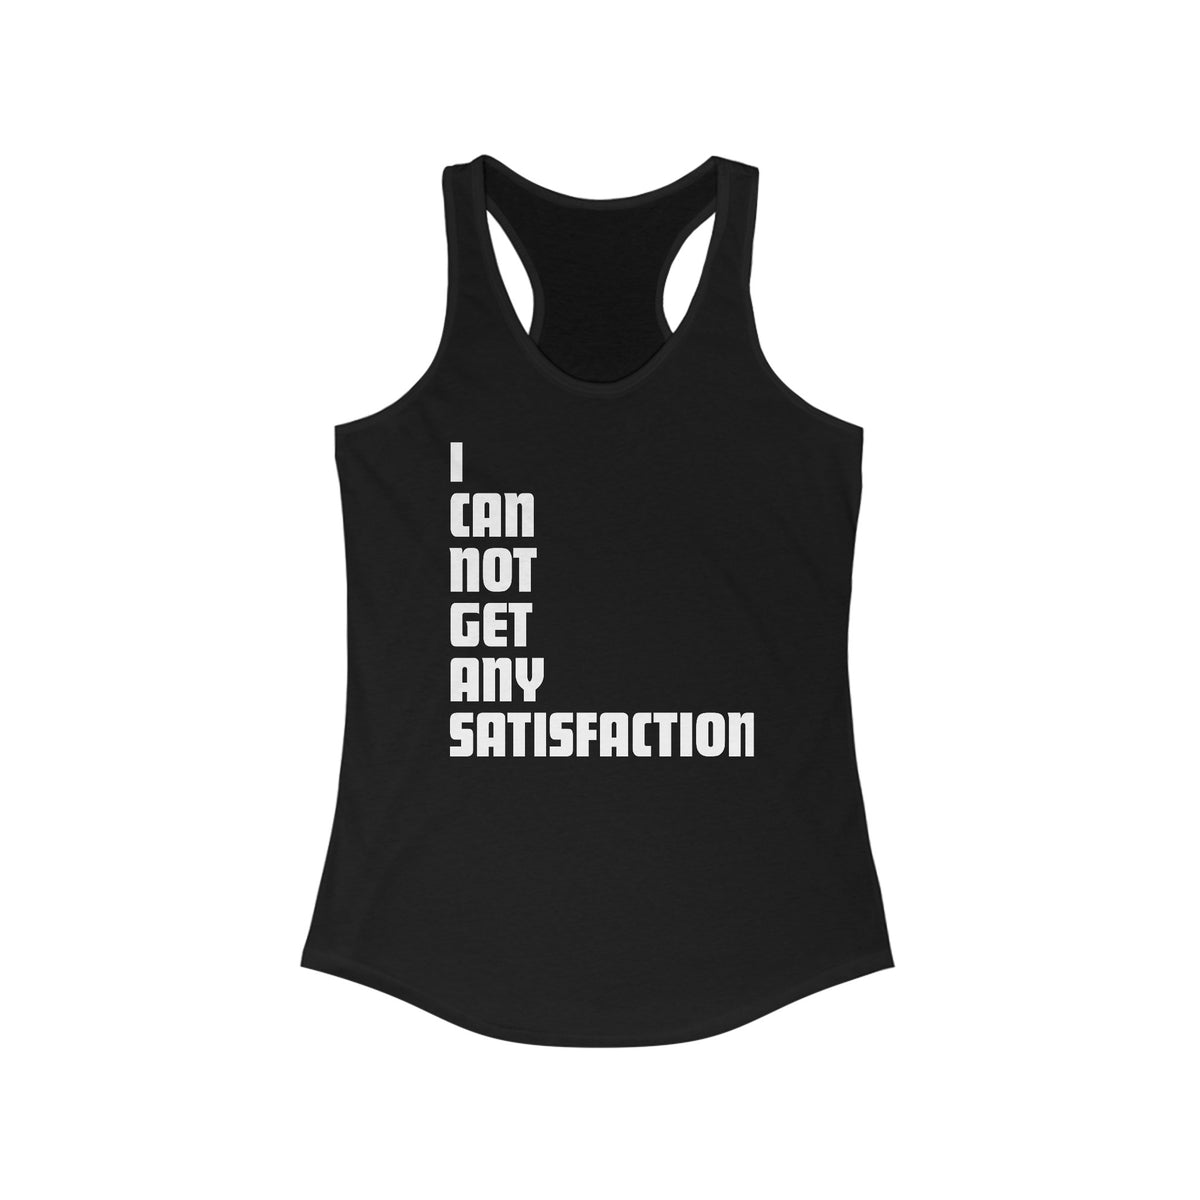 I Can Not Get Any Satisfaction - Women's Racerback Tank